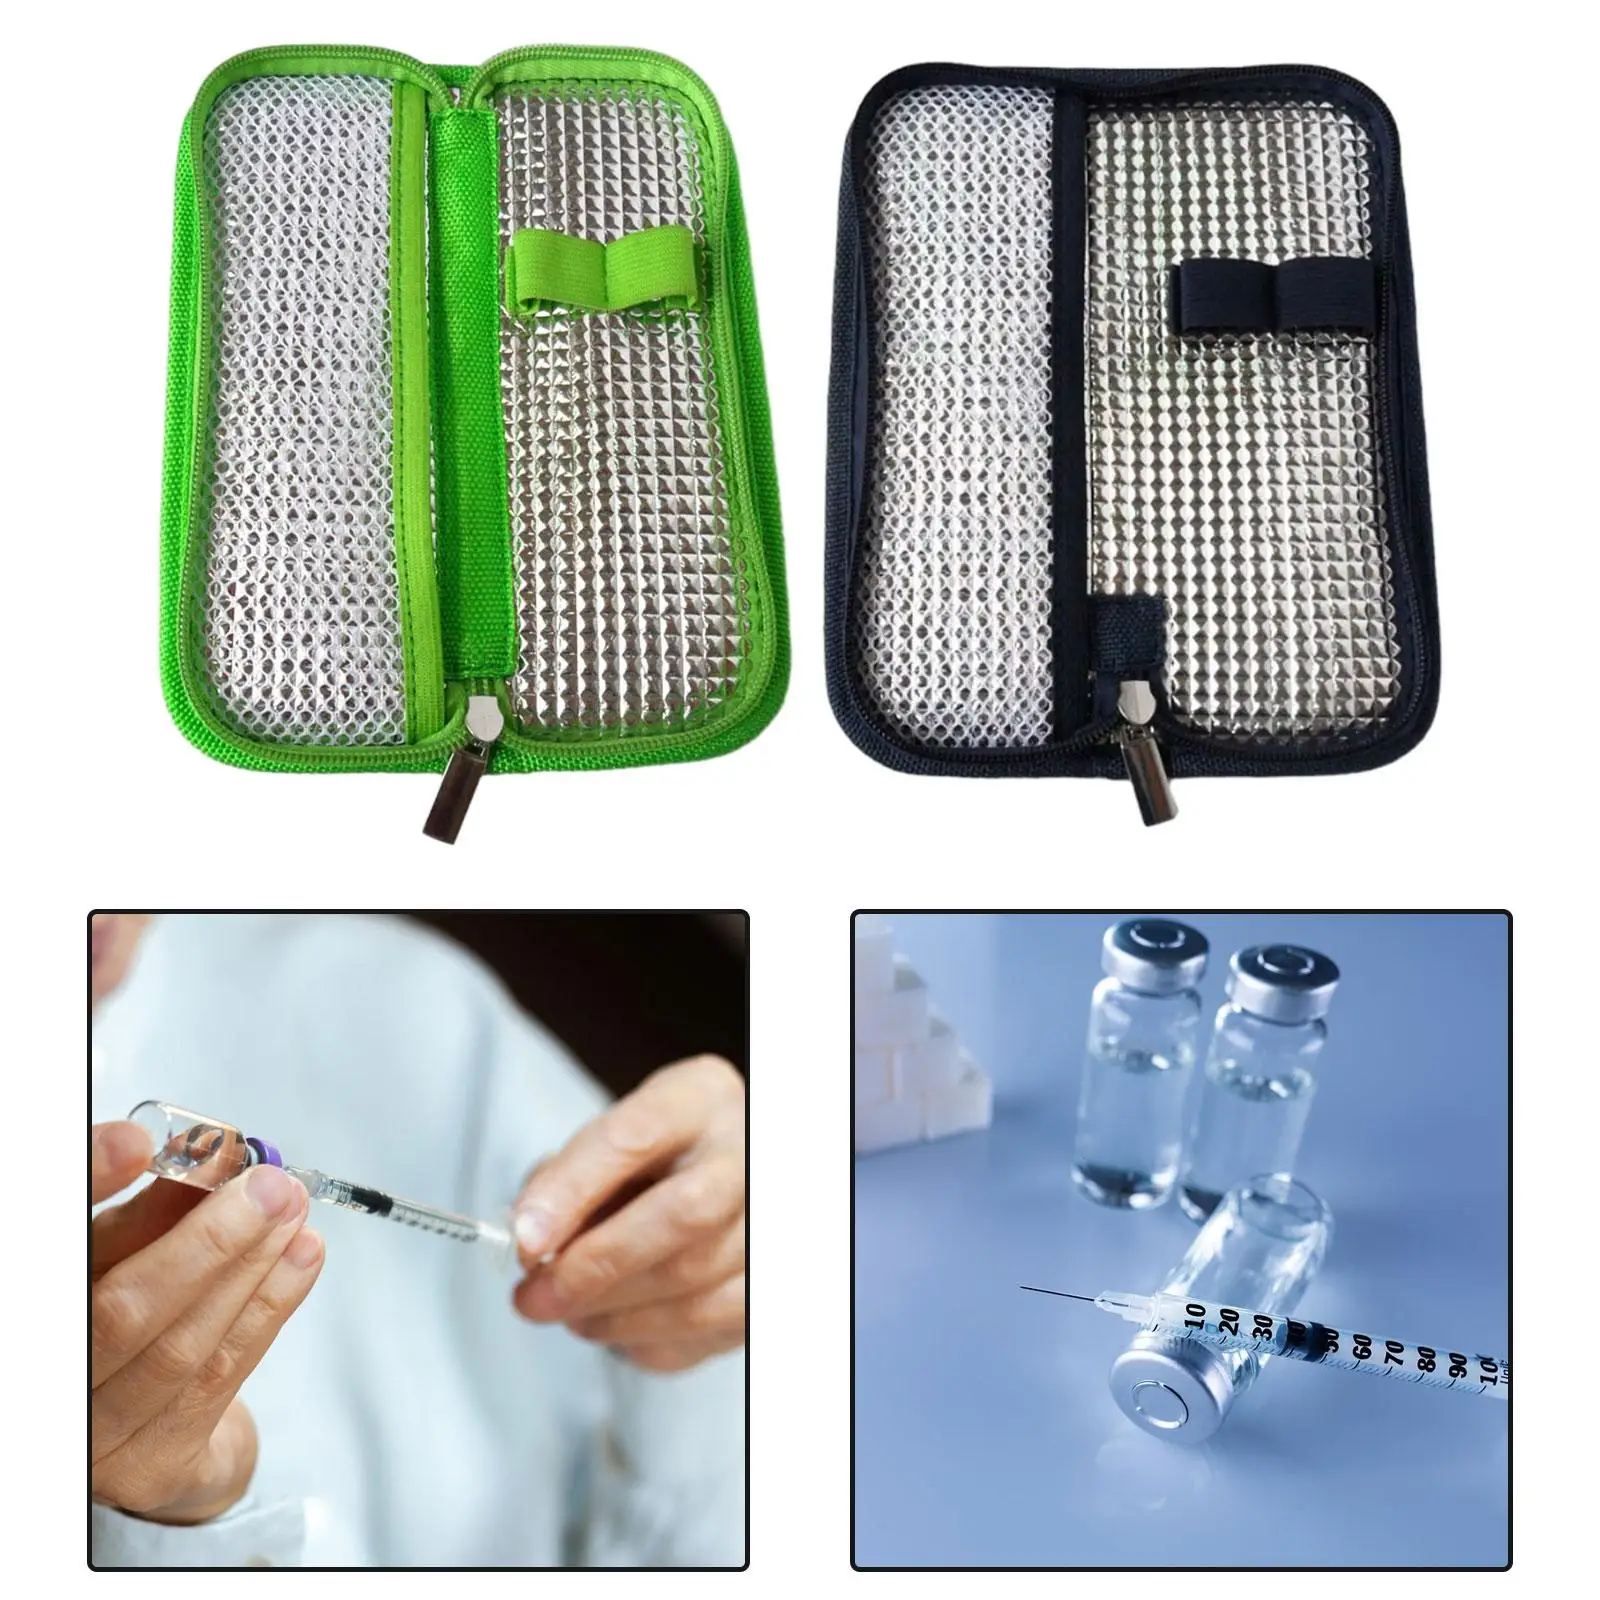 Insulation Cooling Bag Convenient Organizer Cooling Pocket Ice Packs Supplies Protector Keep Cool Cooling Pouch Travel Case